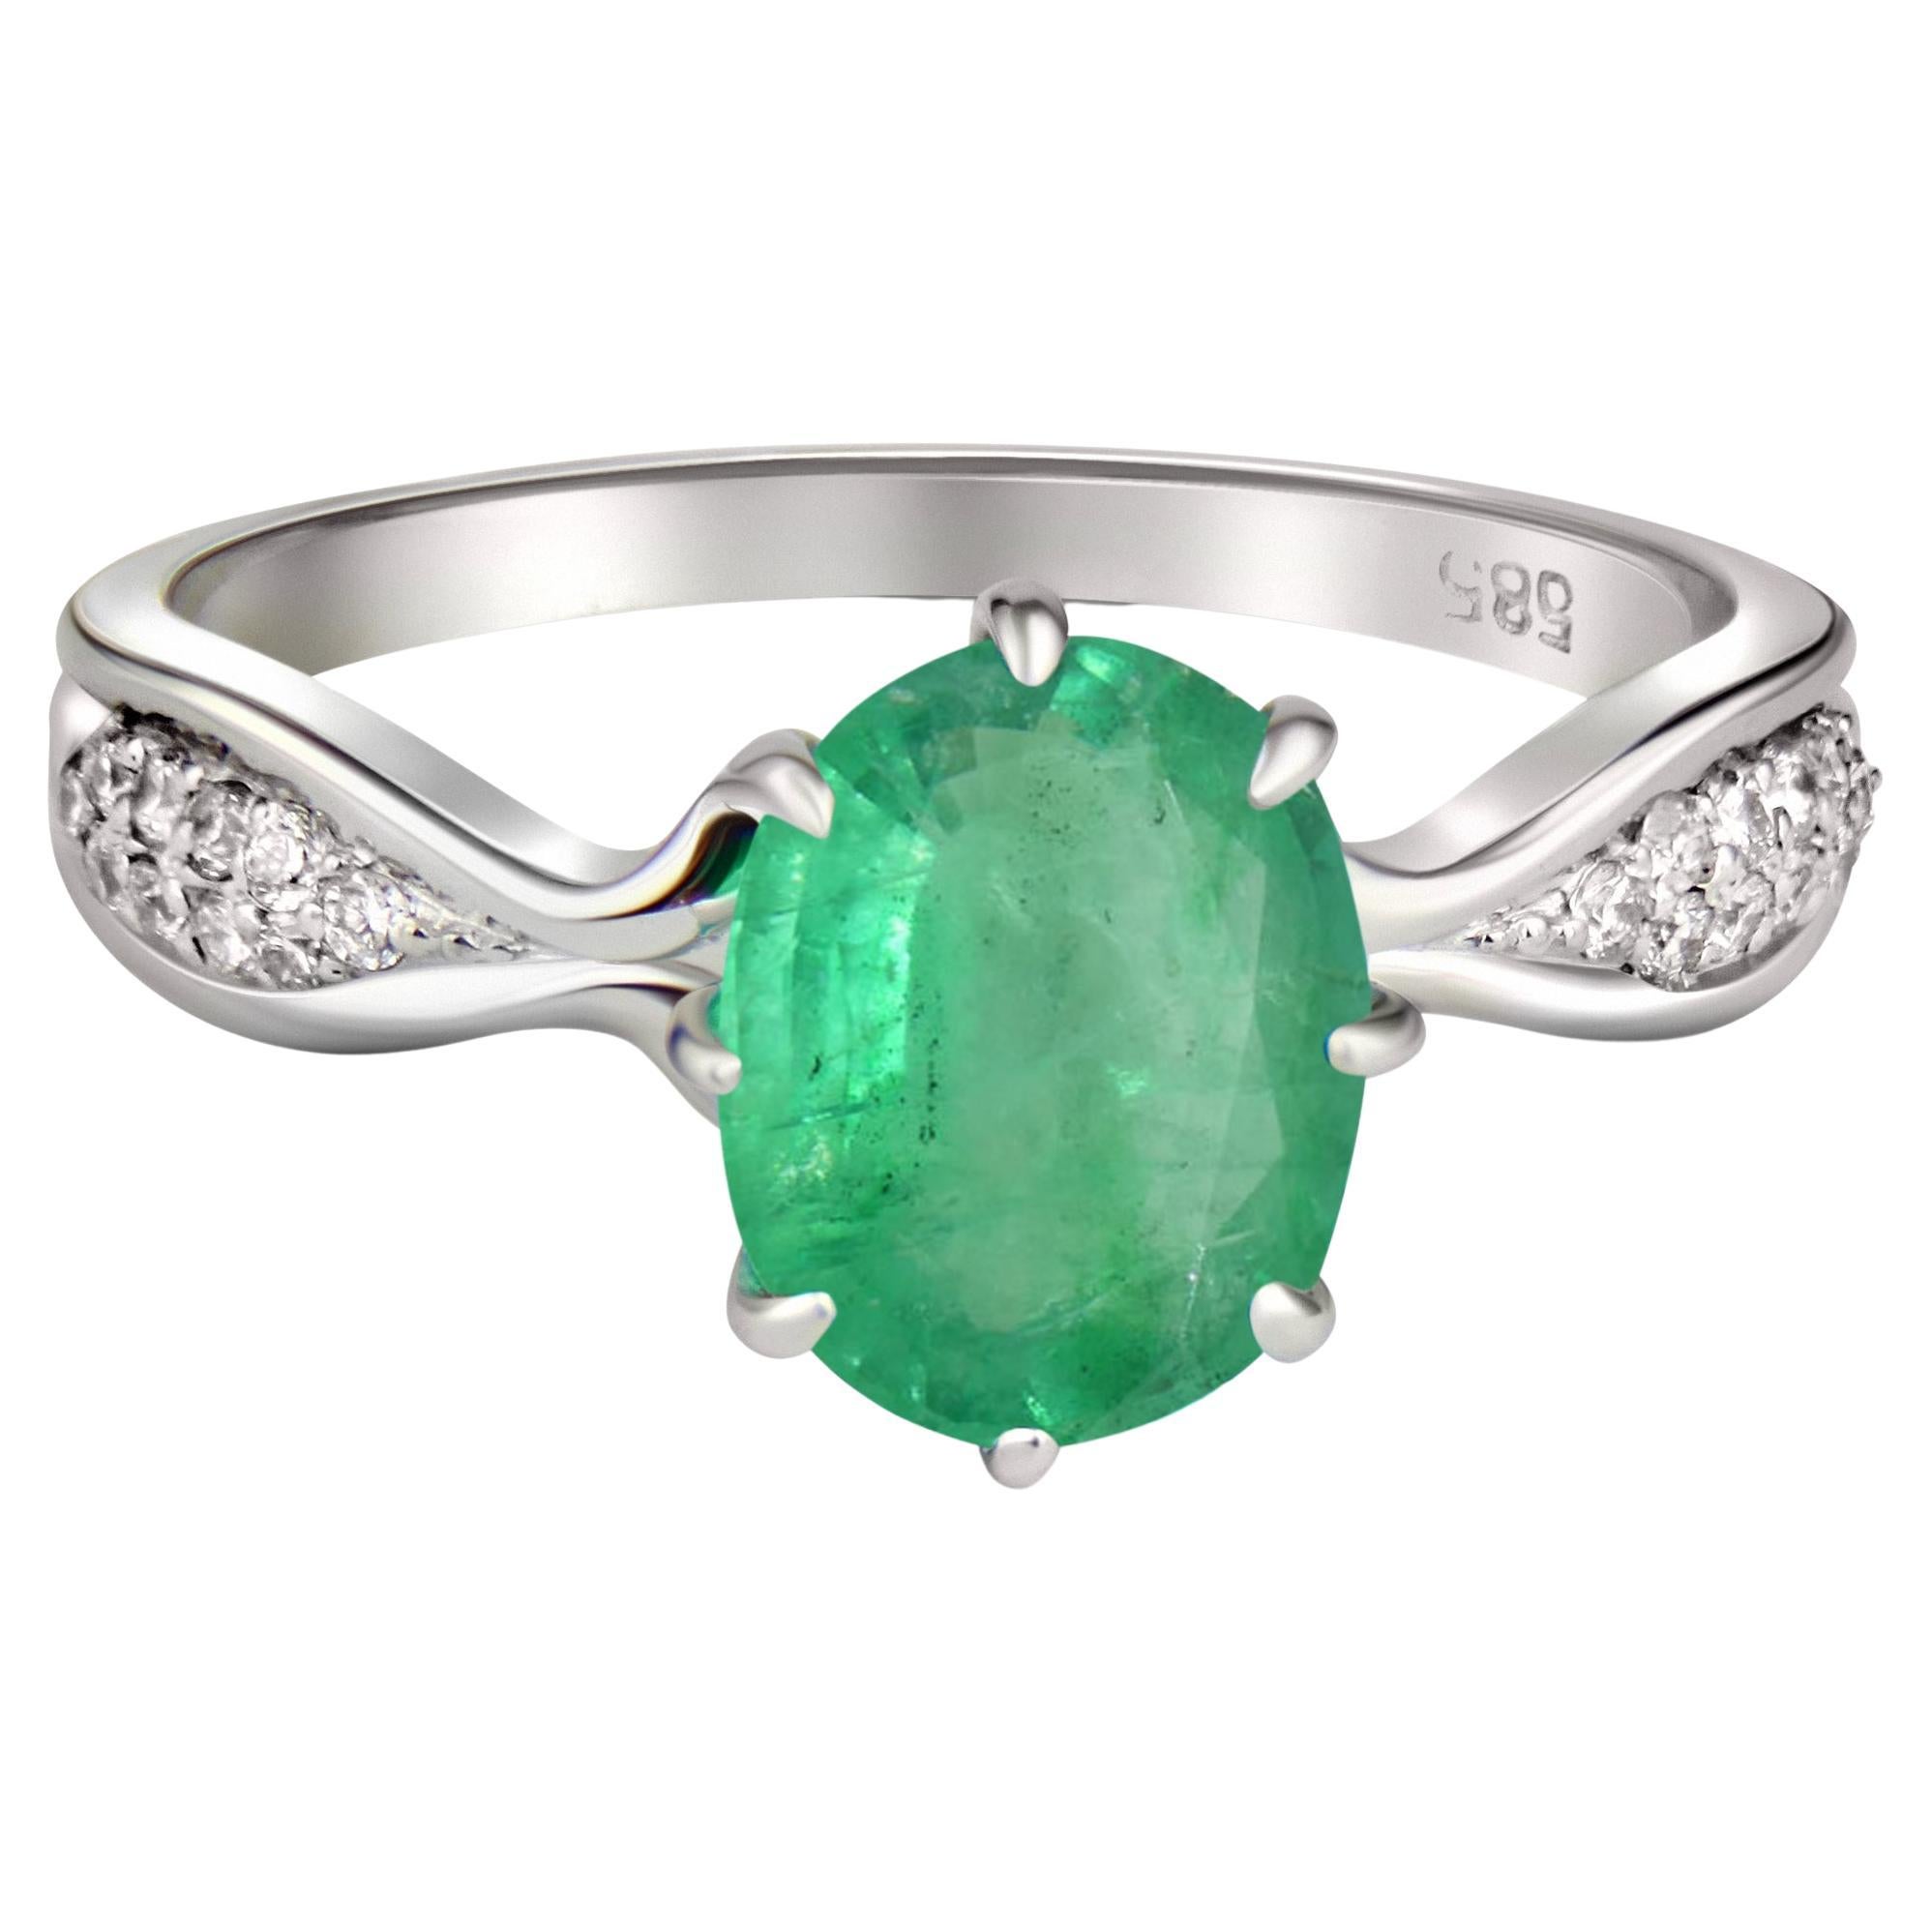 For Sale:  Emerald 14k Gold Ring, Oval Emerald Ring, Emerald Gold Ring